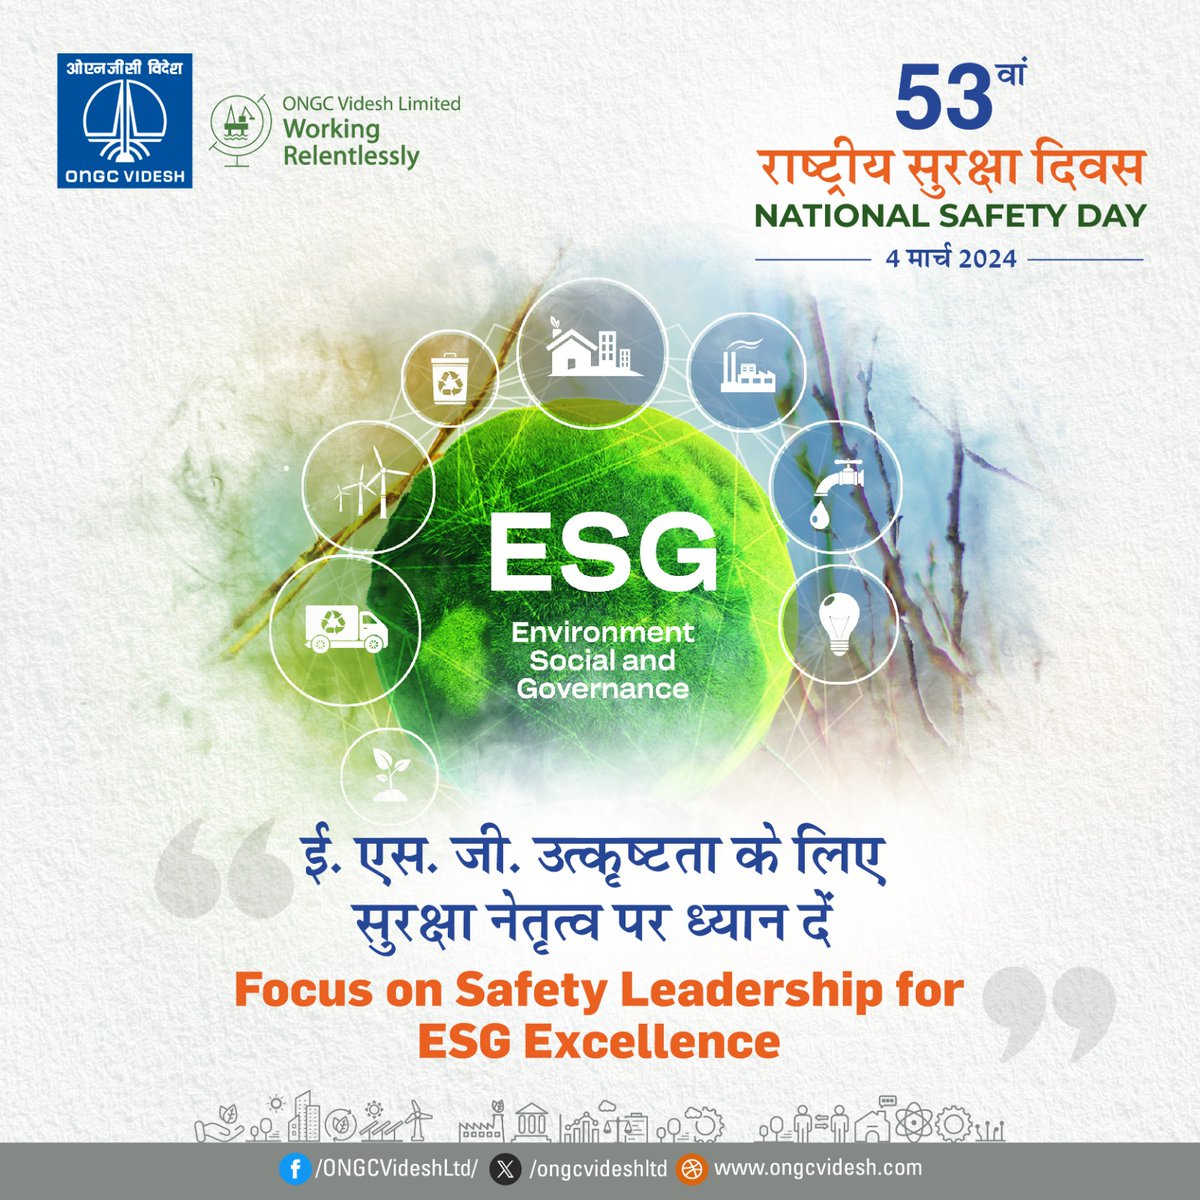 On the occasion of 53rd National Safety Day we reaffirm our pledge to uphold the highest safety standards, empower our teams with leadership skills, and drive towards ESG excellence. With 32 projects spread over 15 countries, @ongcvideshltd , not only commemorates the importance